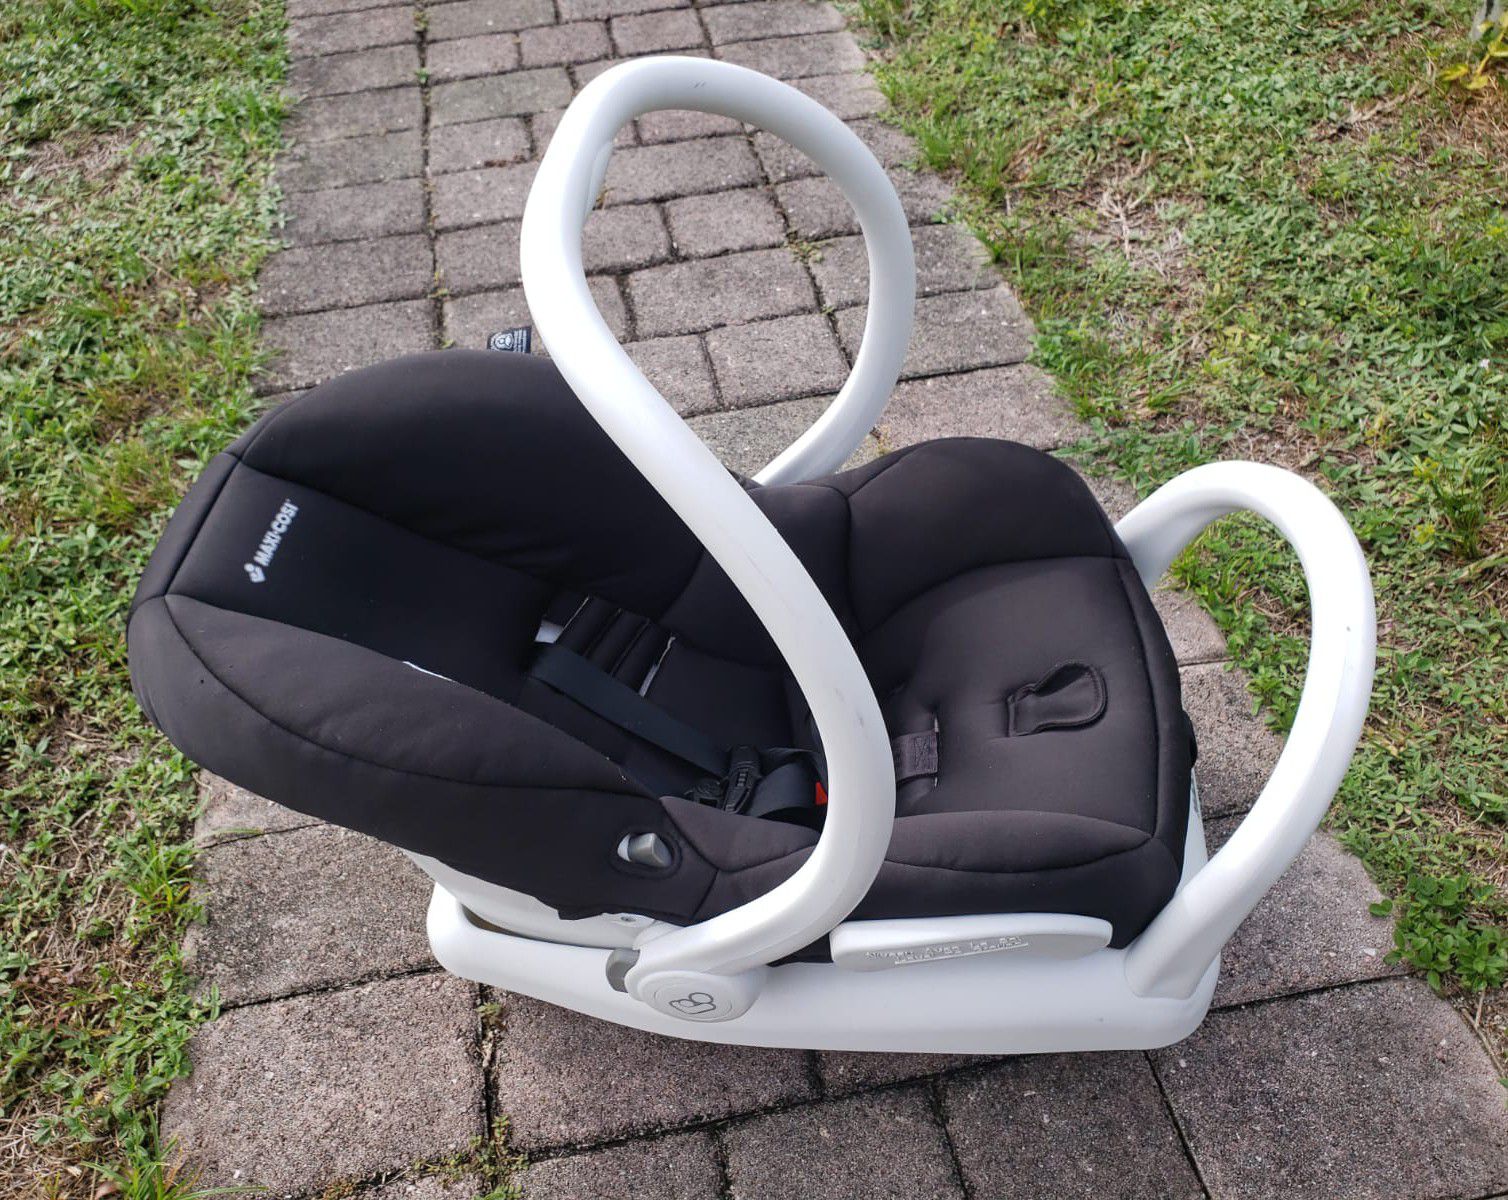 Maxi Cosi rear facing infant car seat with seat base